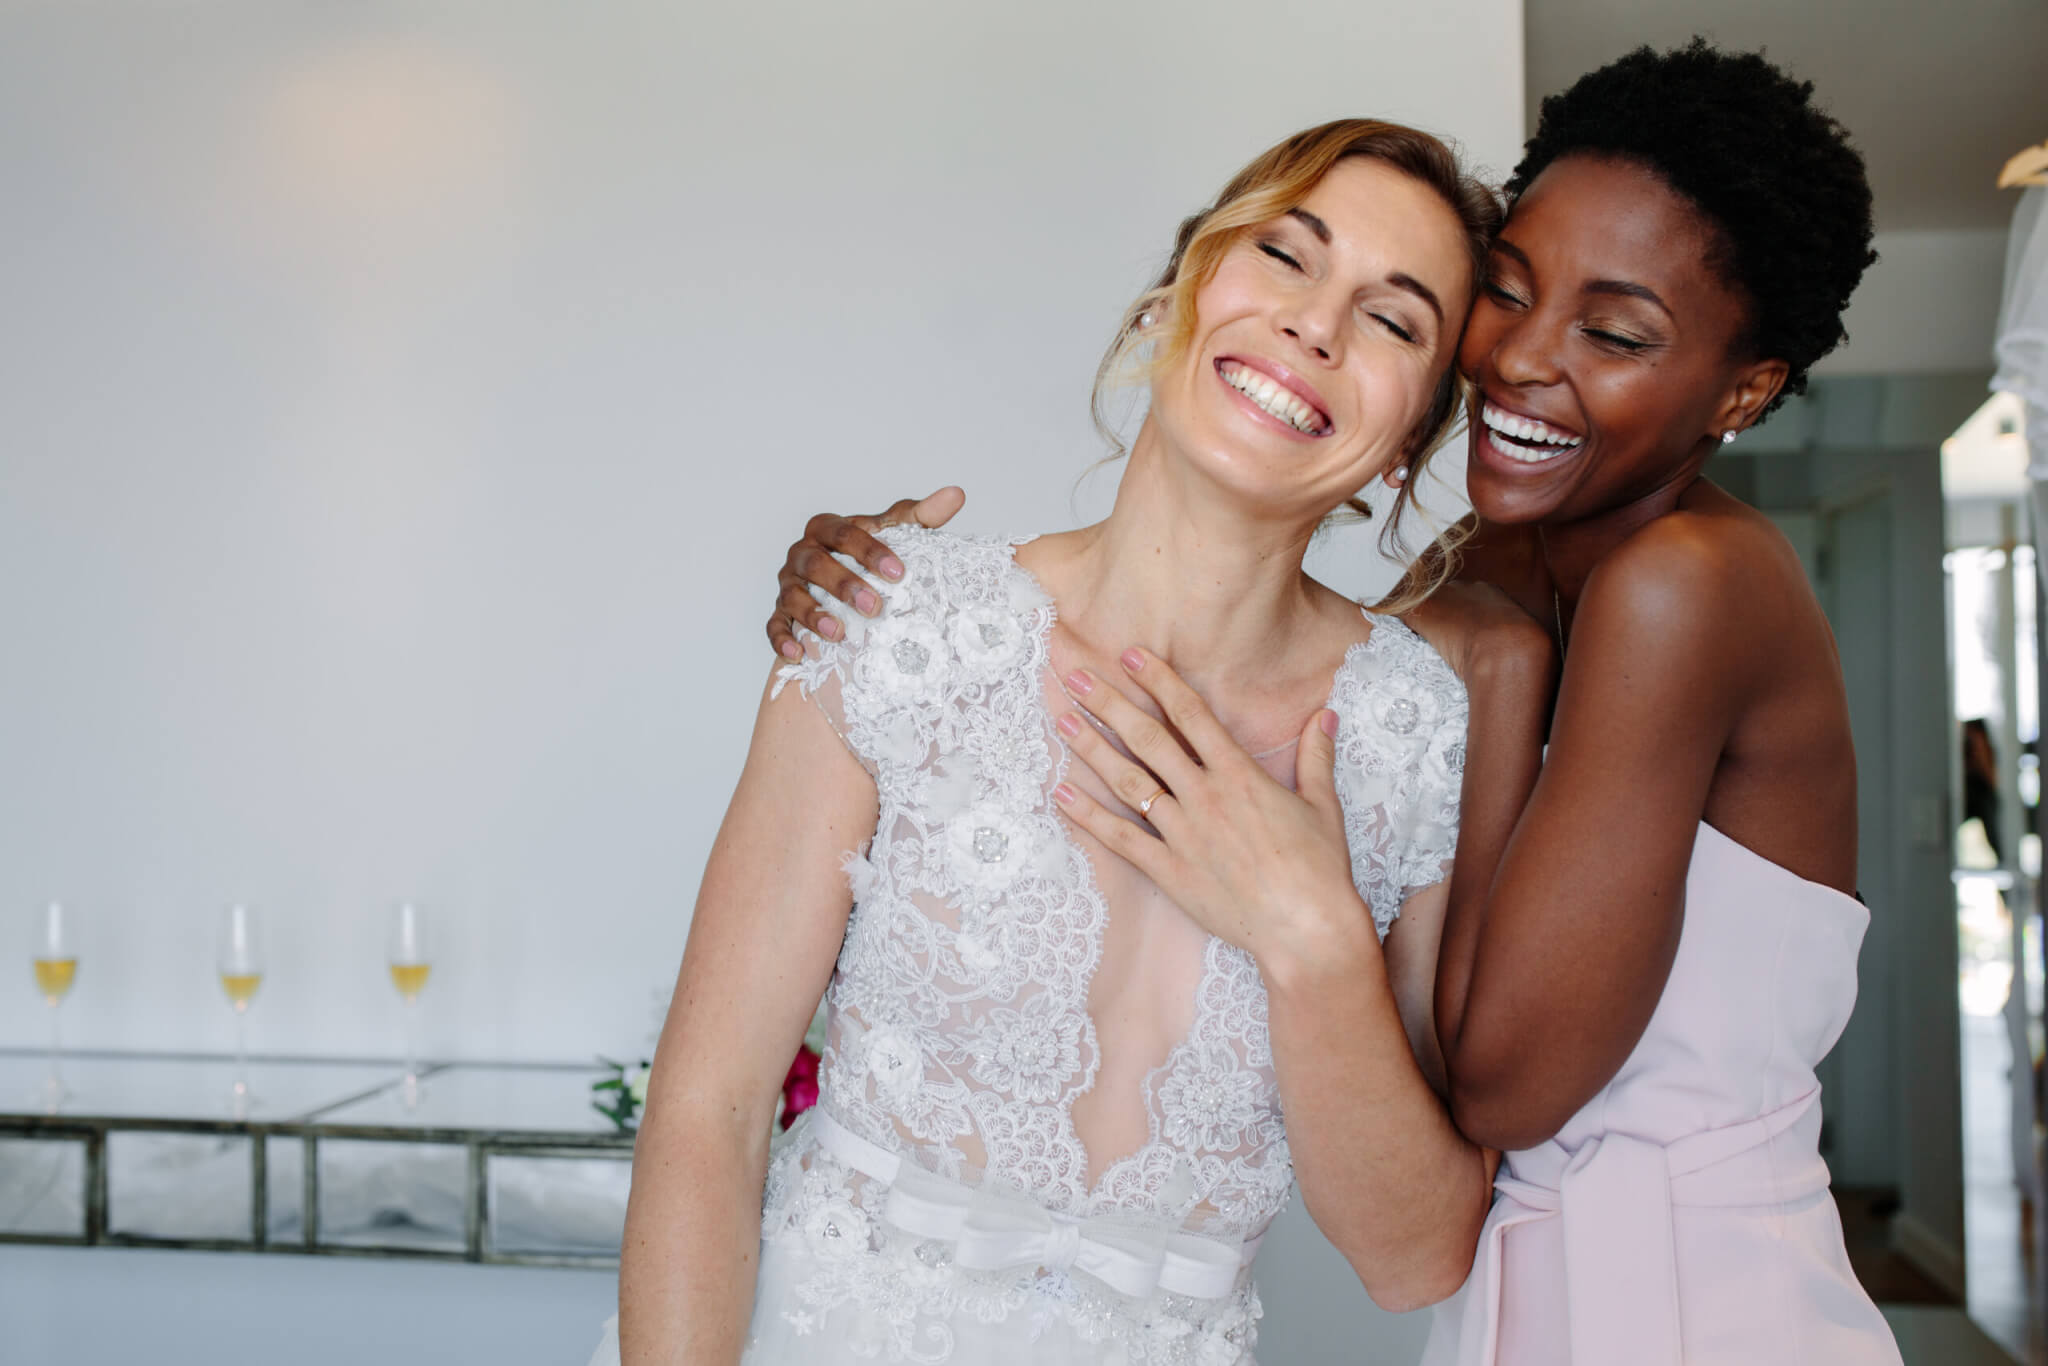 How to Write a Maid of Honor Speech